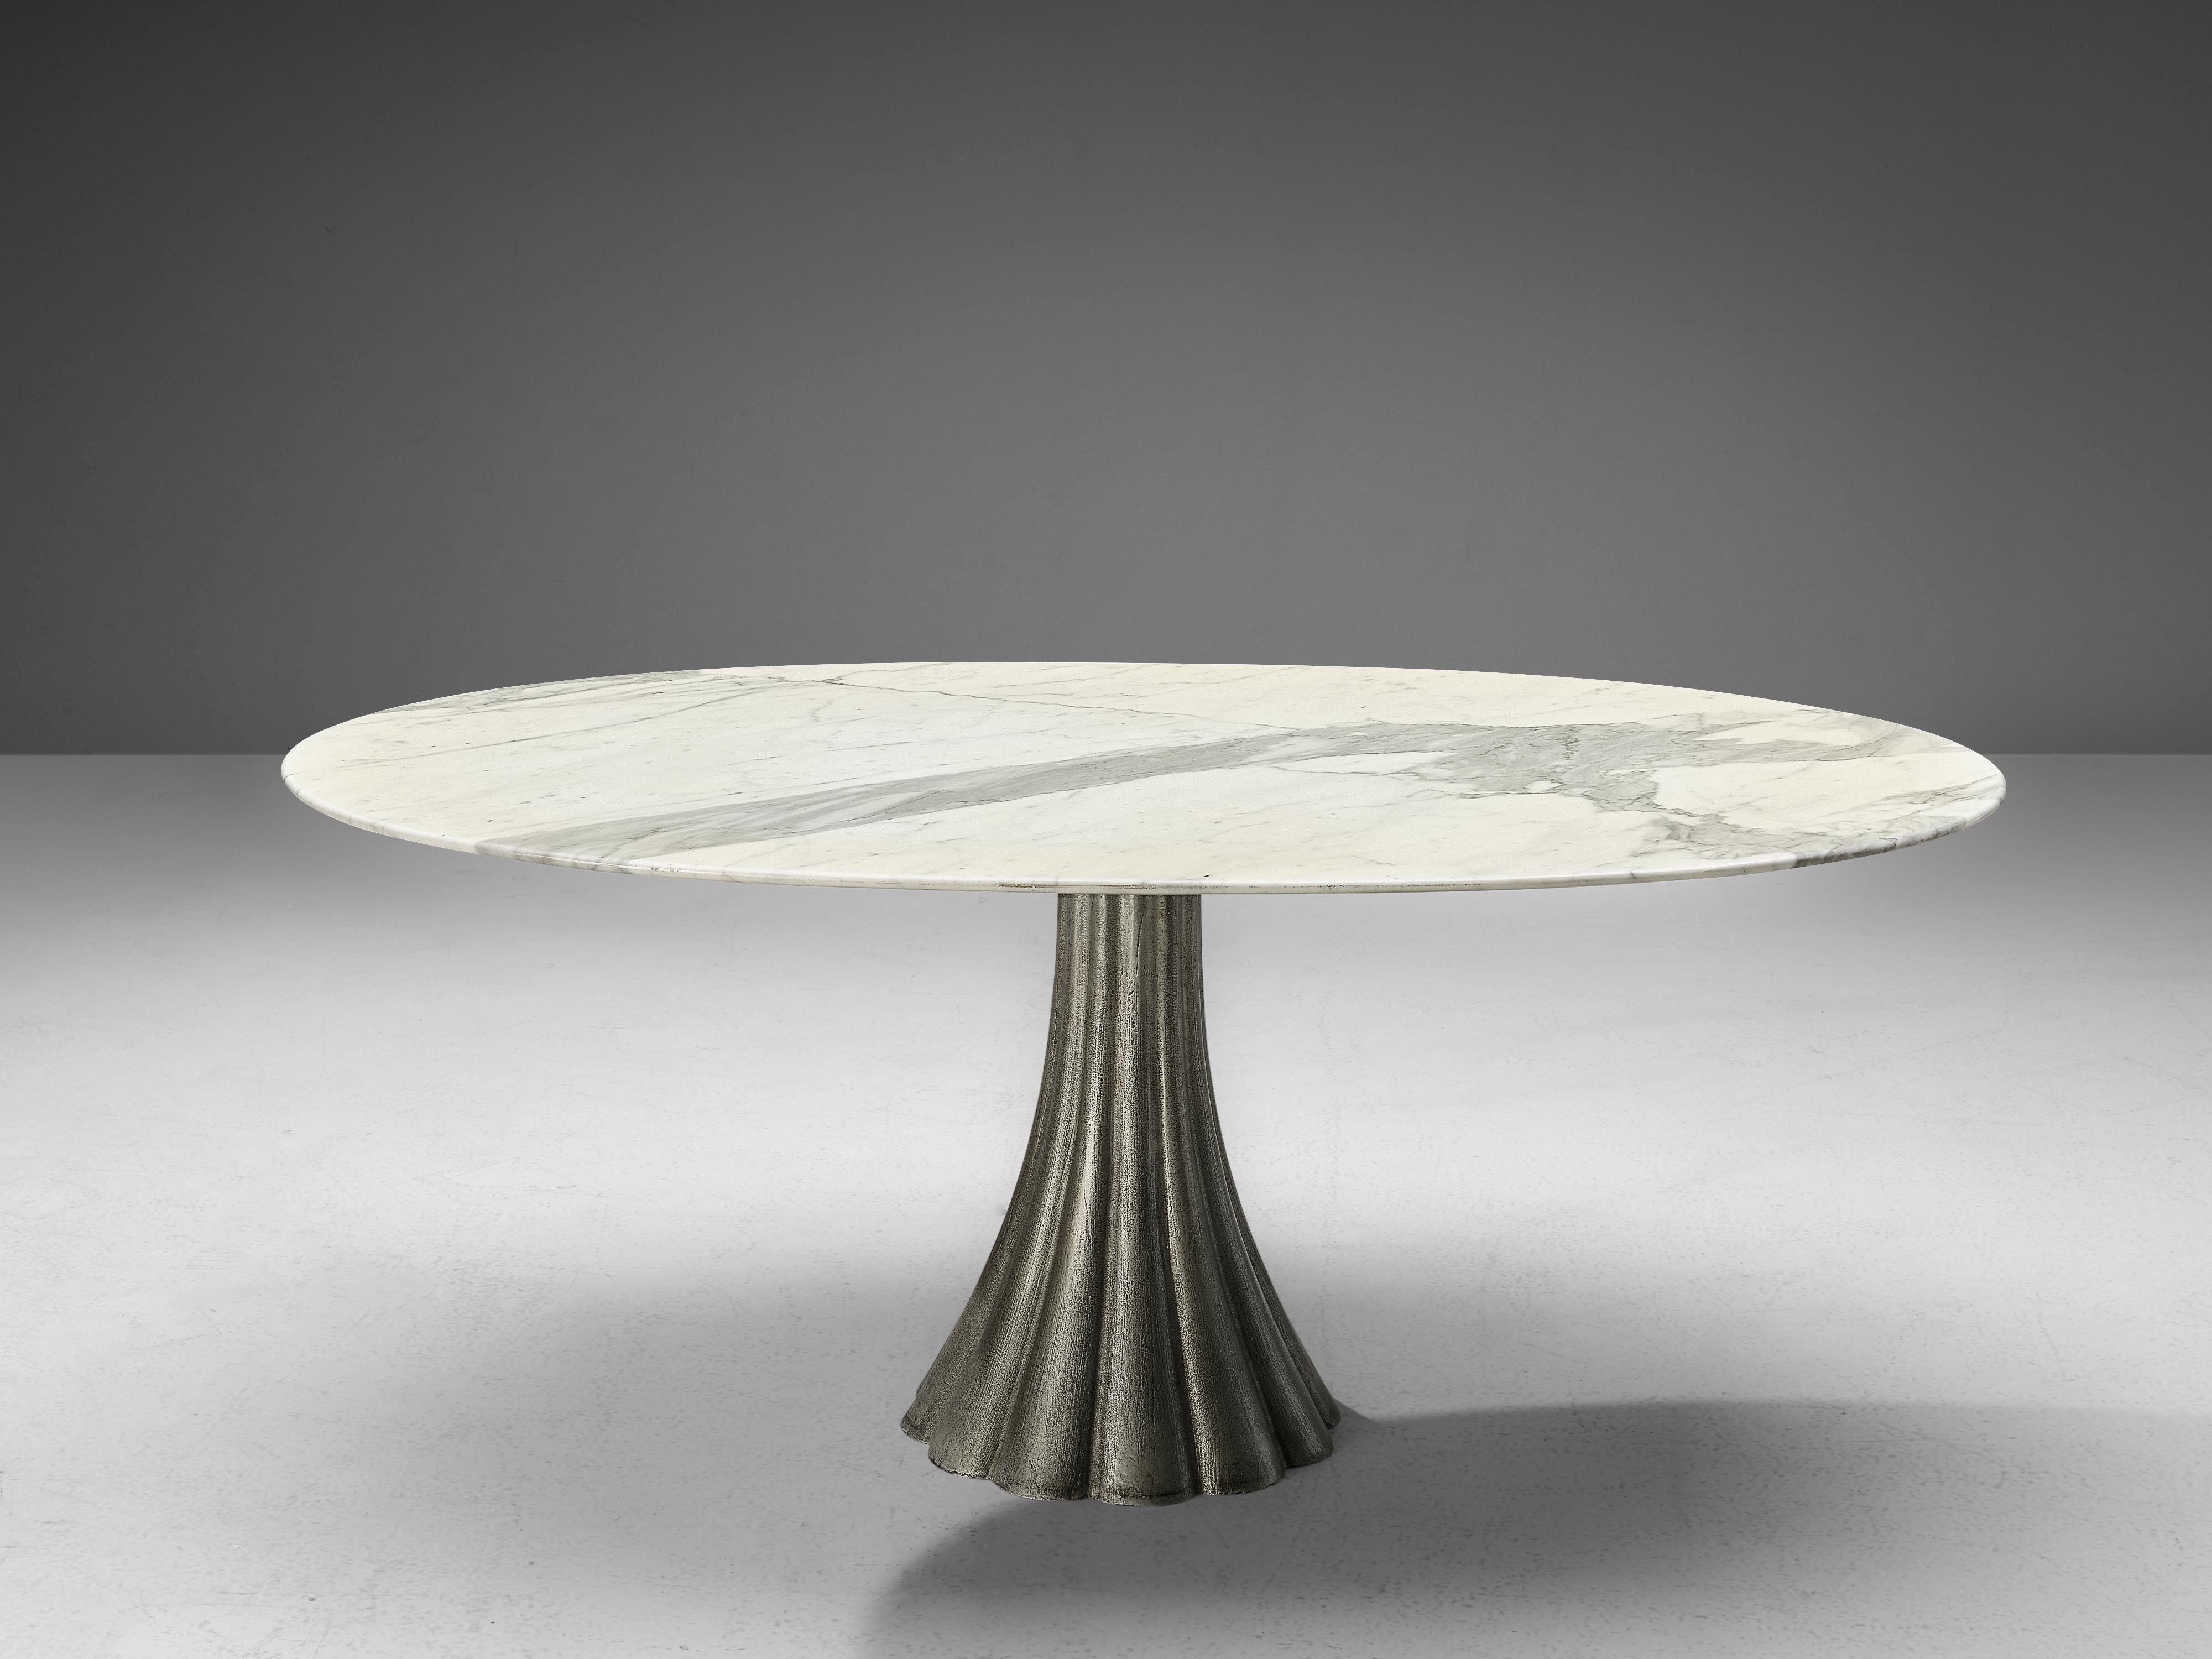 Oval dining table, marble, steel, Italy, 1960s

The oval shaped tabletop shows a beautiful play of natural grey and white colors. The pedestal table is constructed with a scalloped shaped base, made out of steel. The flared base is tapered towards